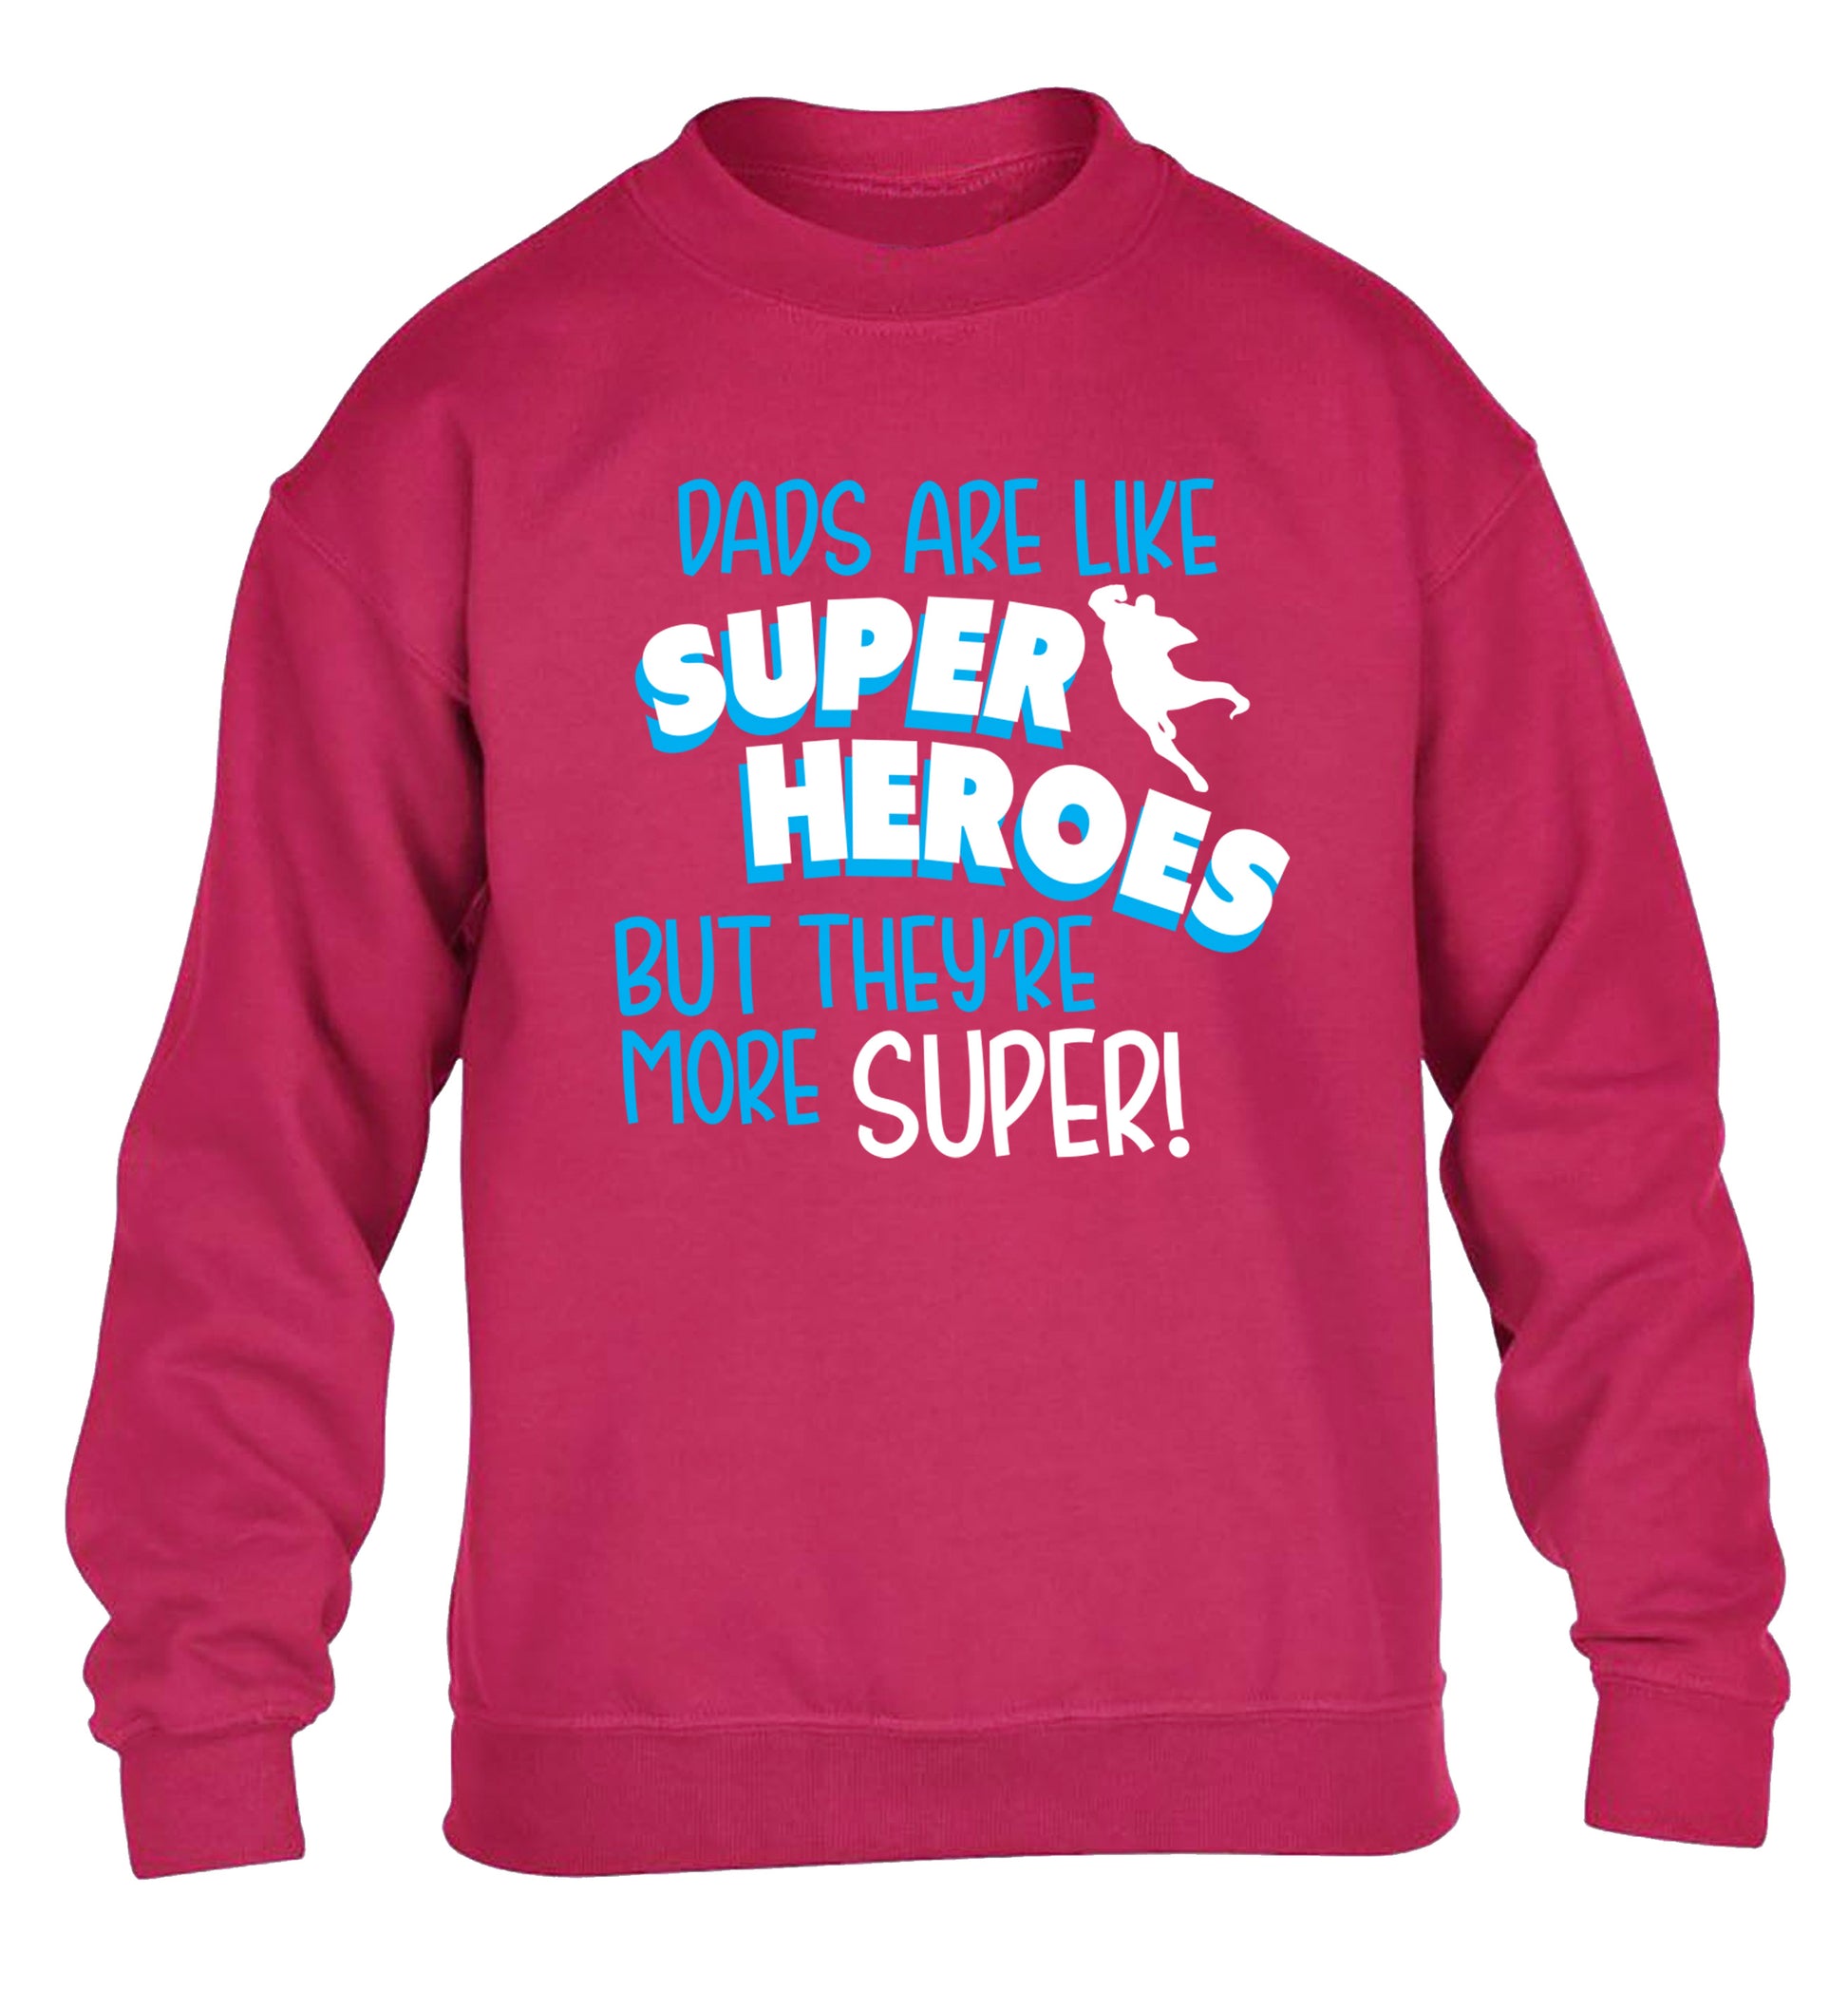 Dads are like superheros but they're more super children's pink sweater 12-13 Years